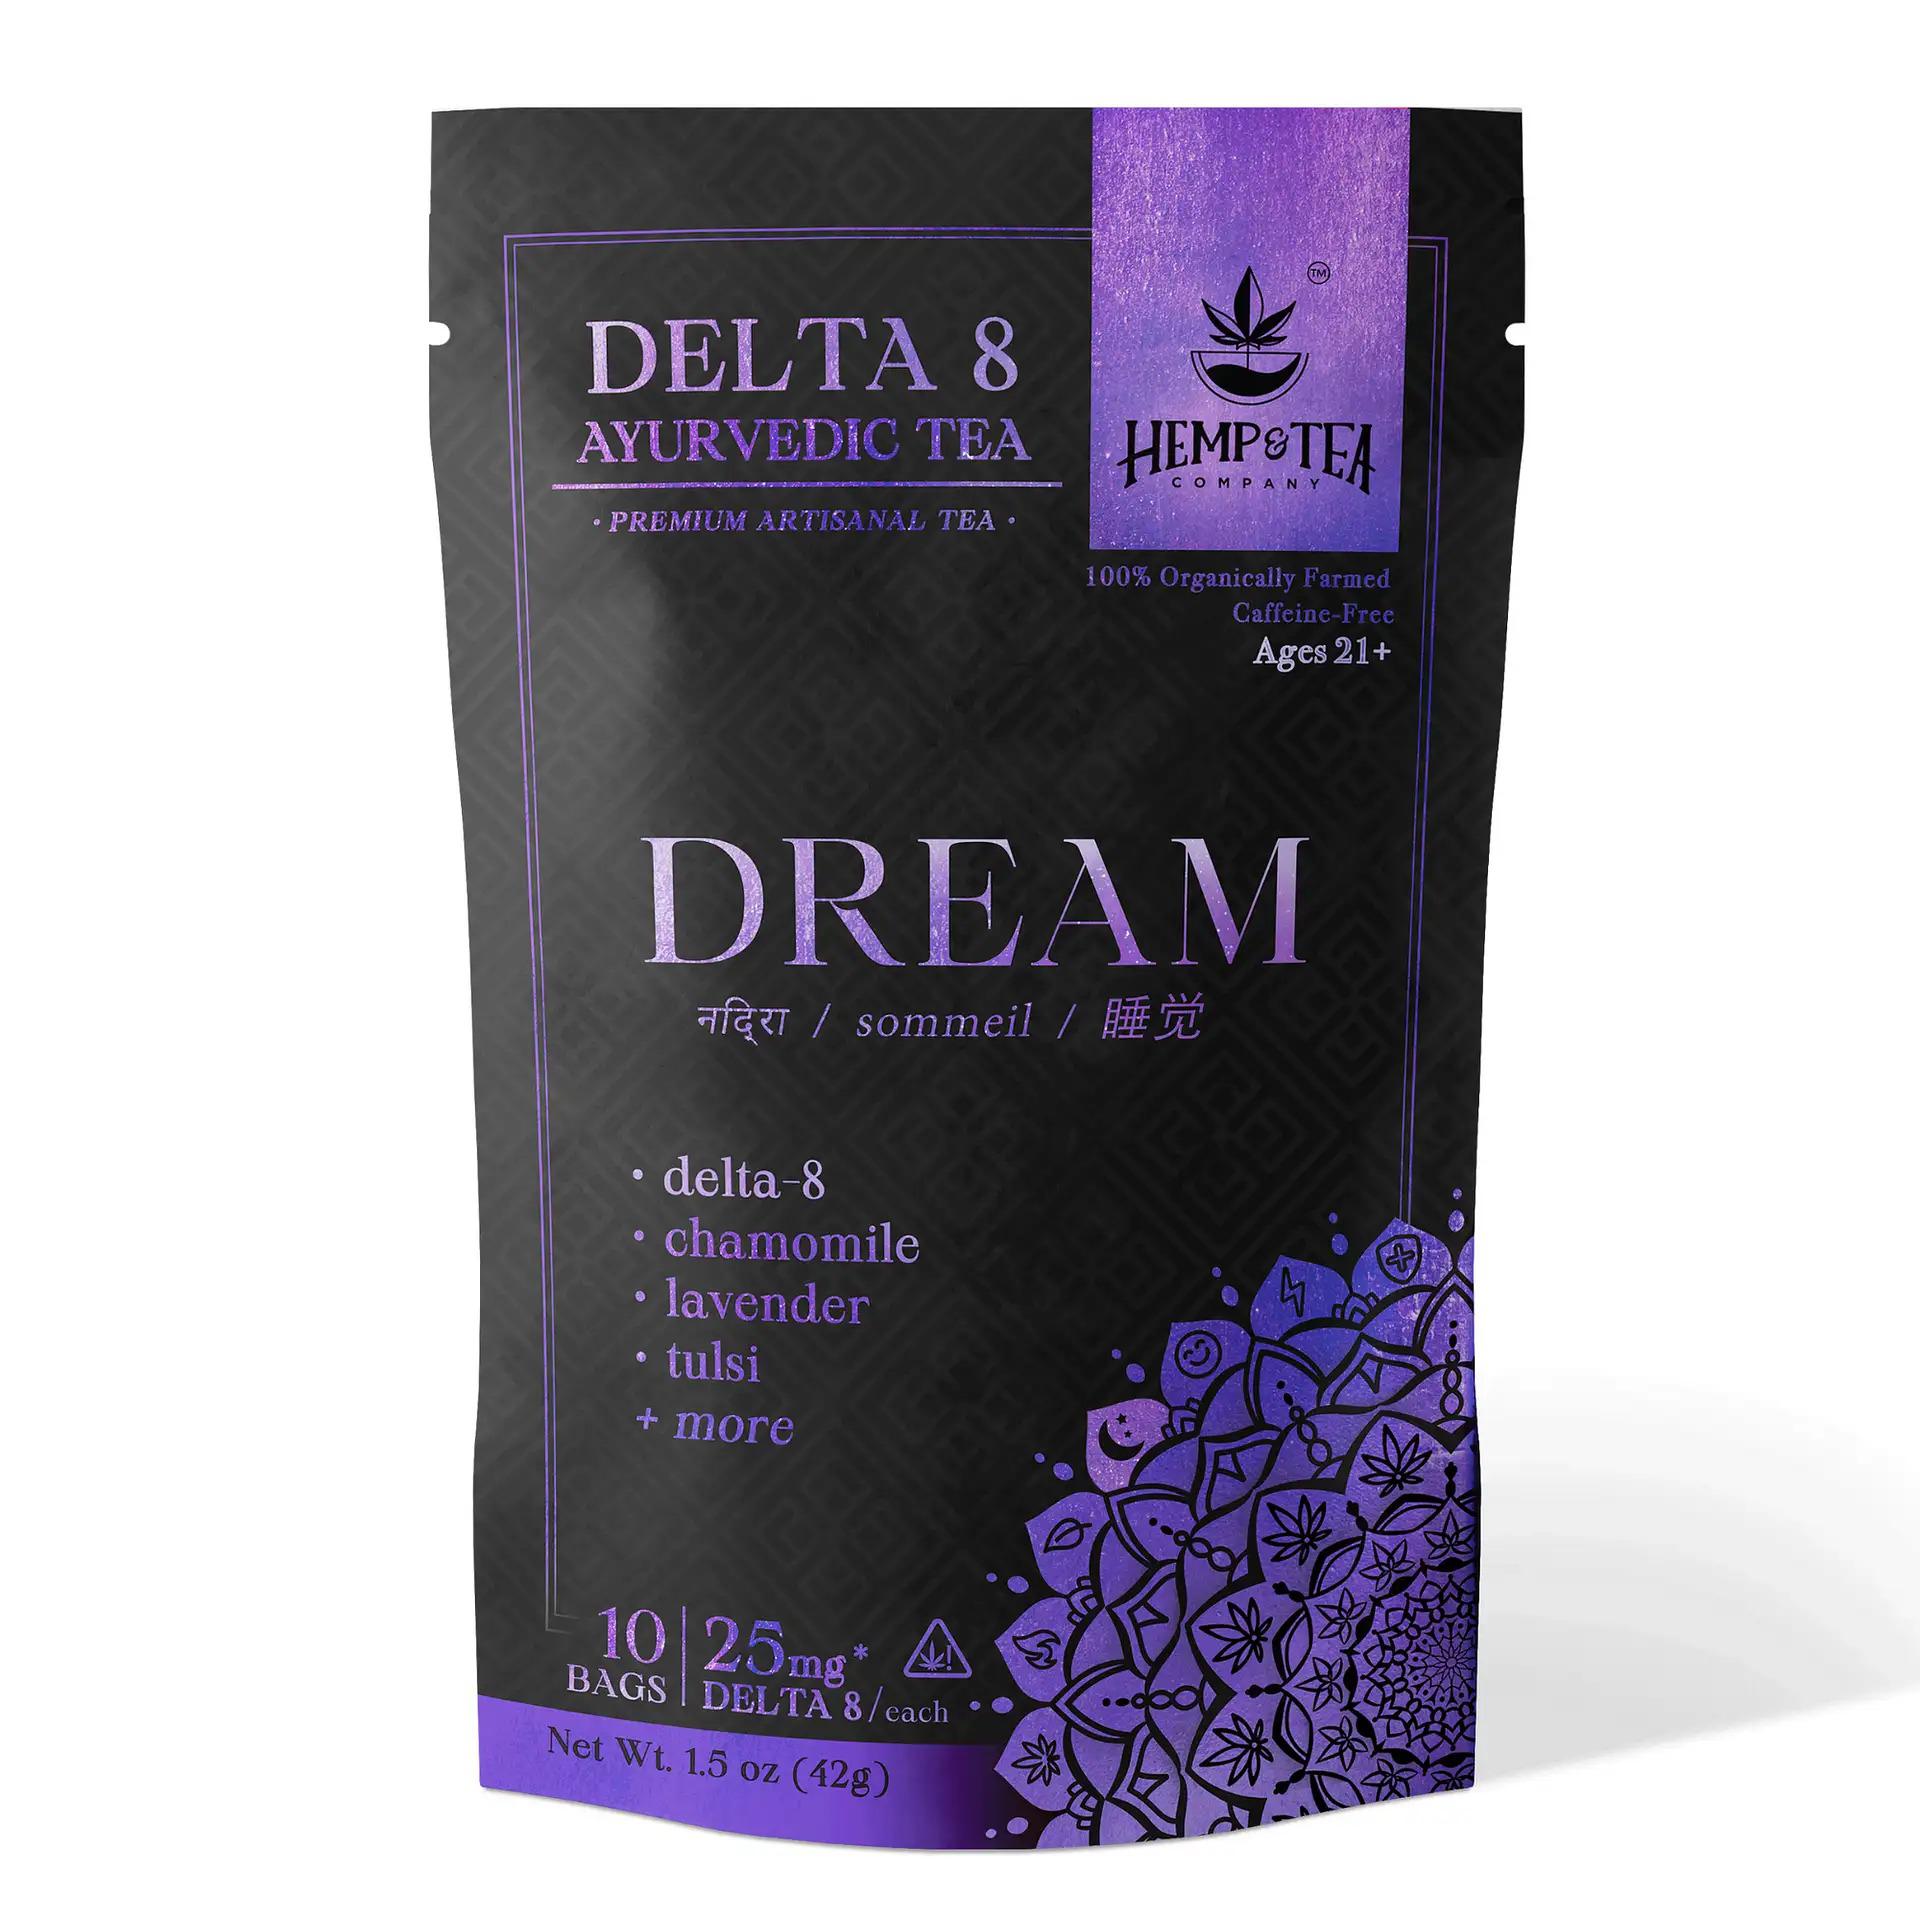 Rediscover the restfulness of deep sleep with our hand-crafted Delta 8 Tea Bags.

Our Dream blend is designed with water-soluble Delta 8, which is FOUR TIMES more bioavailable than other forms. Along with our balancing Ayurvedic herbs, this tea delivers its effects to the fullest, supporting rest and regeneration.